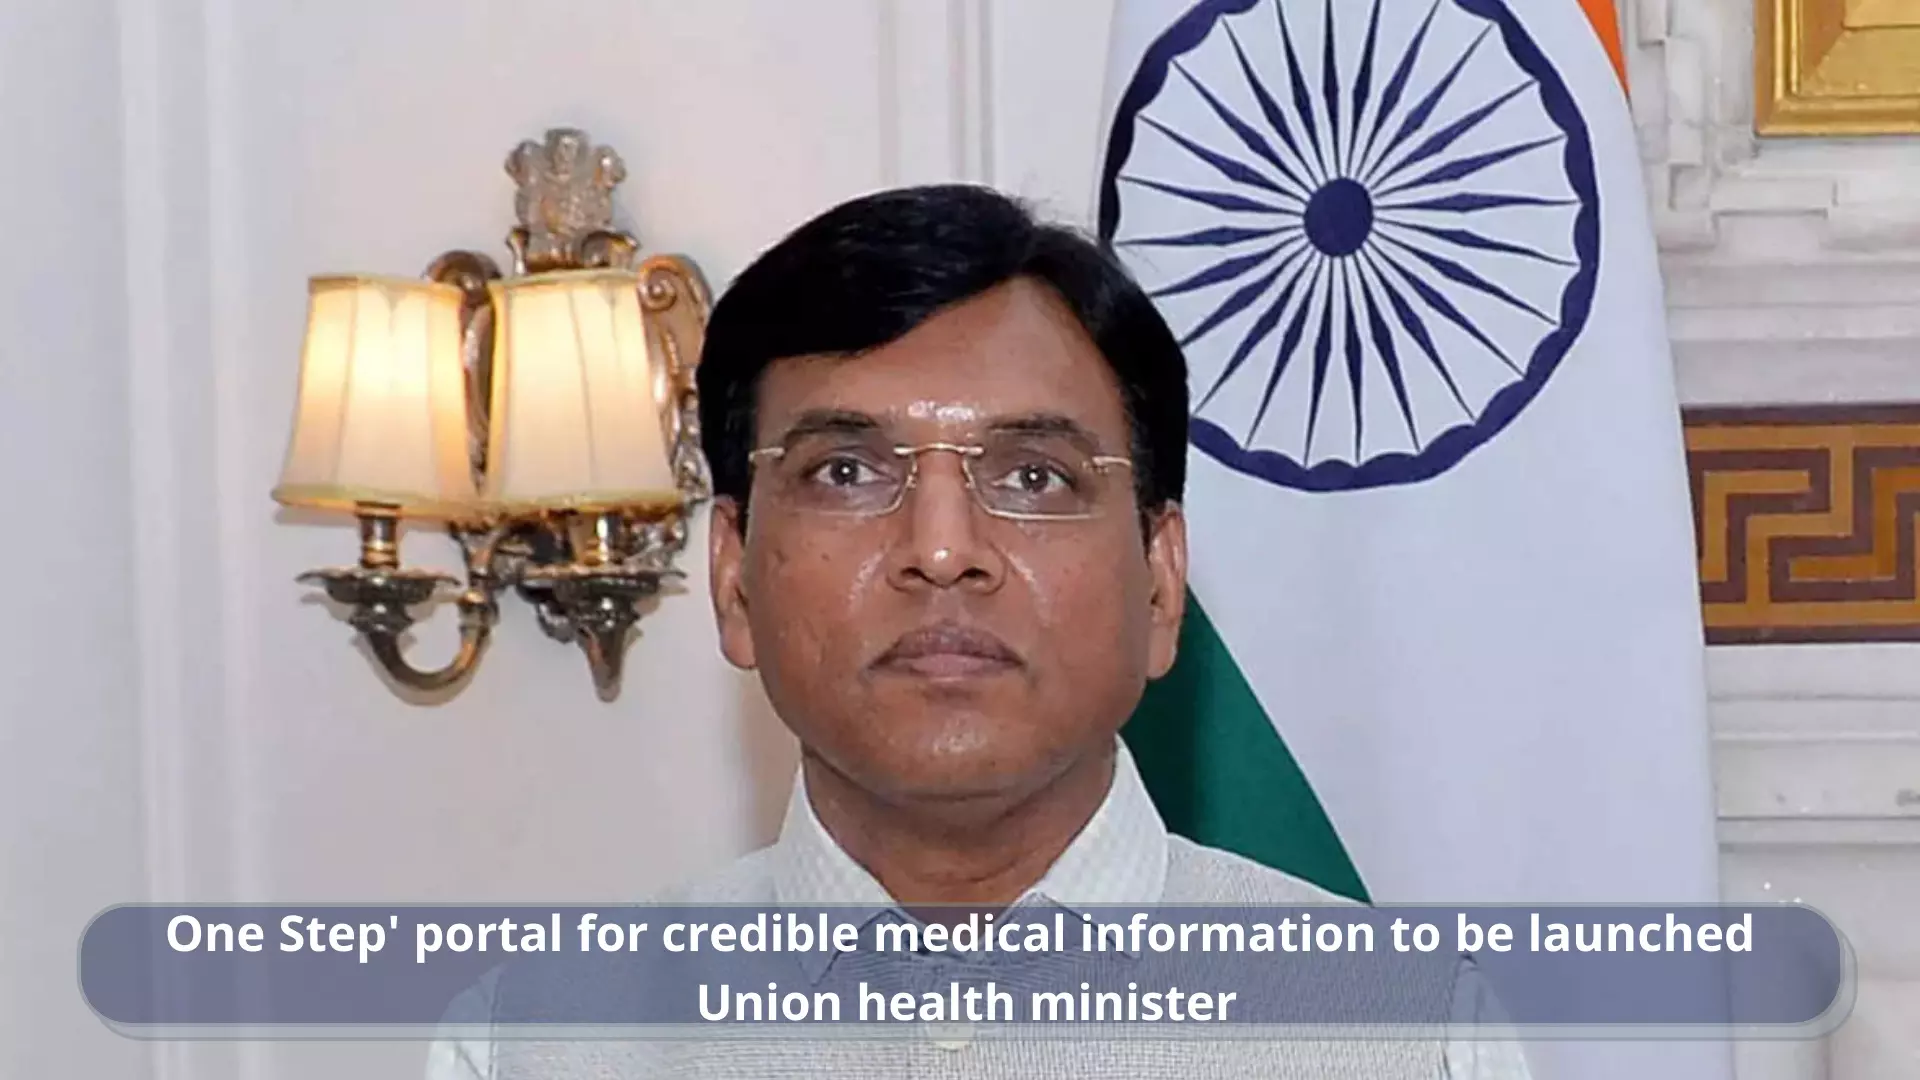 One Step portal for credible medical information to be launched: Union health minister